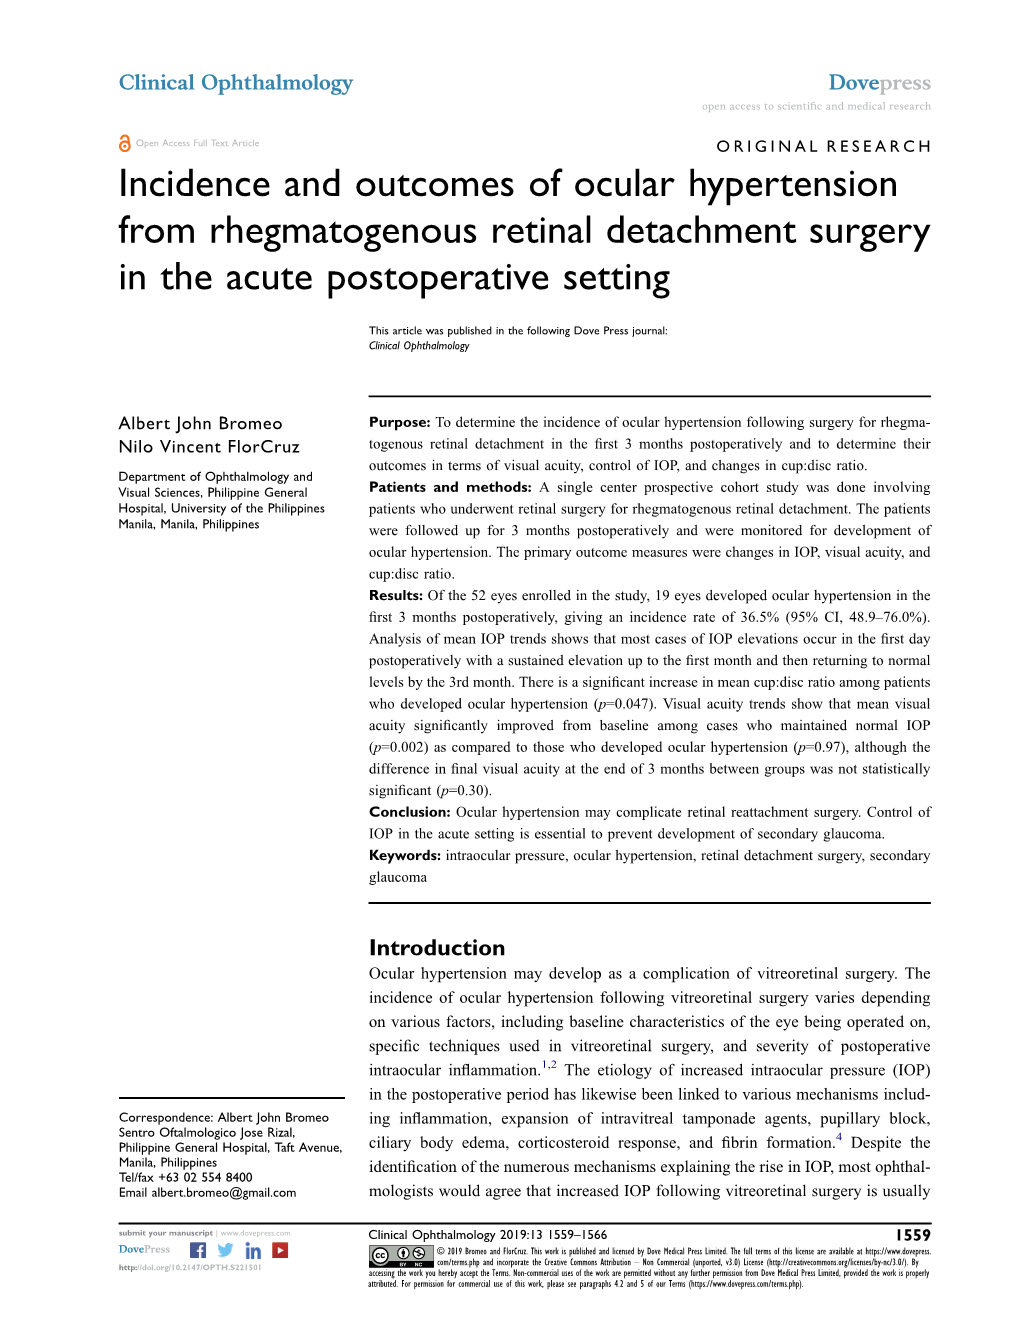 Incidence and Outcomes of Ocular Hypertension from Rhegmatogenous Retinal Detachment Surgery in the Acute Postoperative Setting